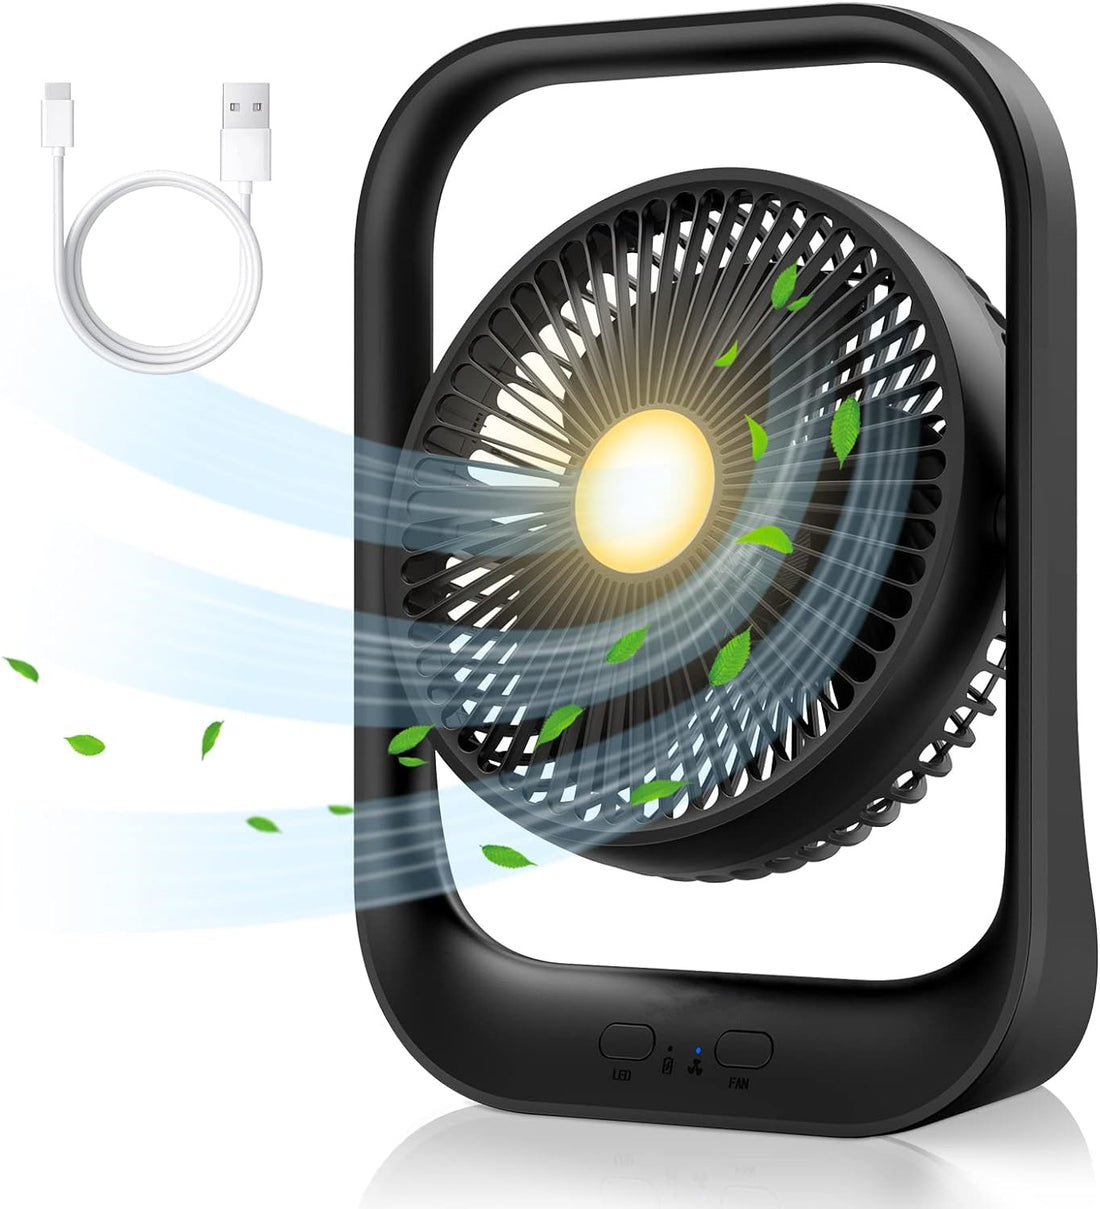 Battery Operated Fan, Camping Fan with Night Light, 3 Speeds Portable Desk Fan,135°Rotation, Rechargeable Quiet Table Fan for Office, Bedroom, Travel, Camping (Deep Black)